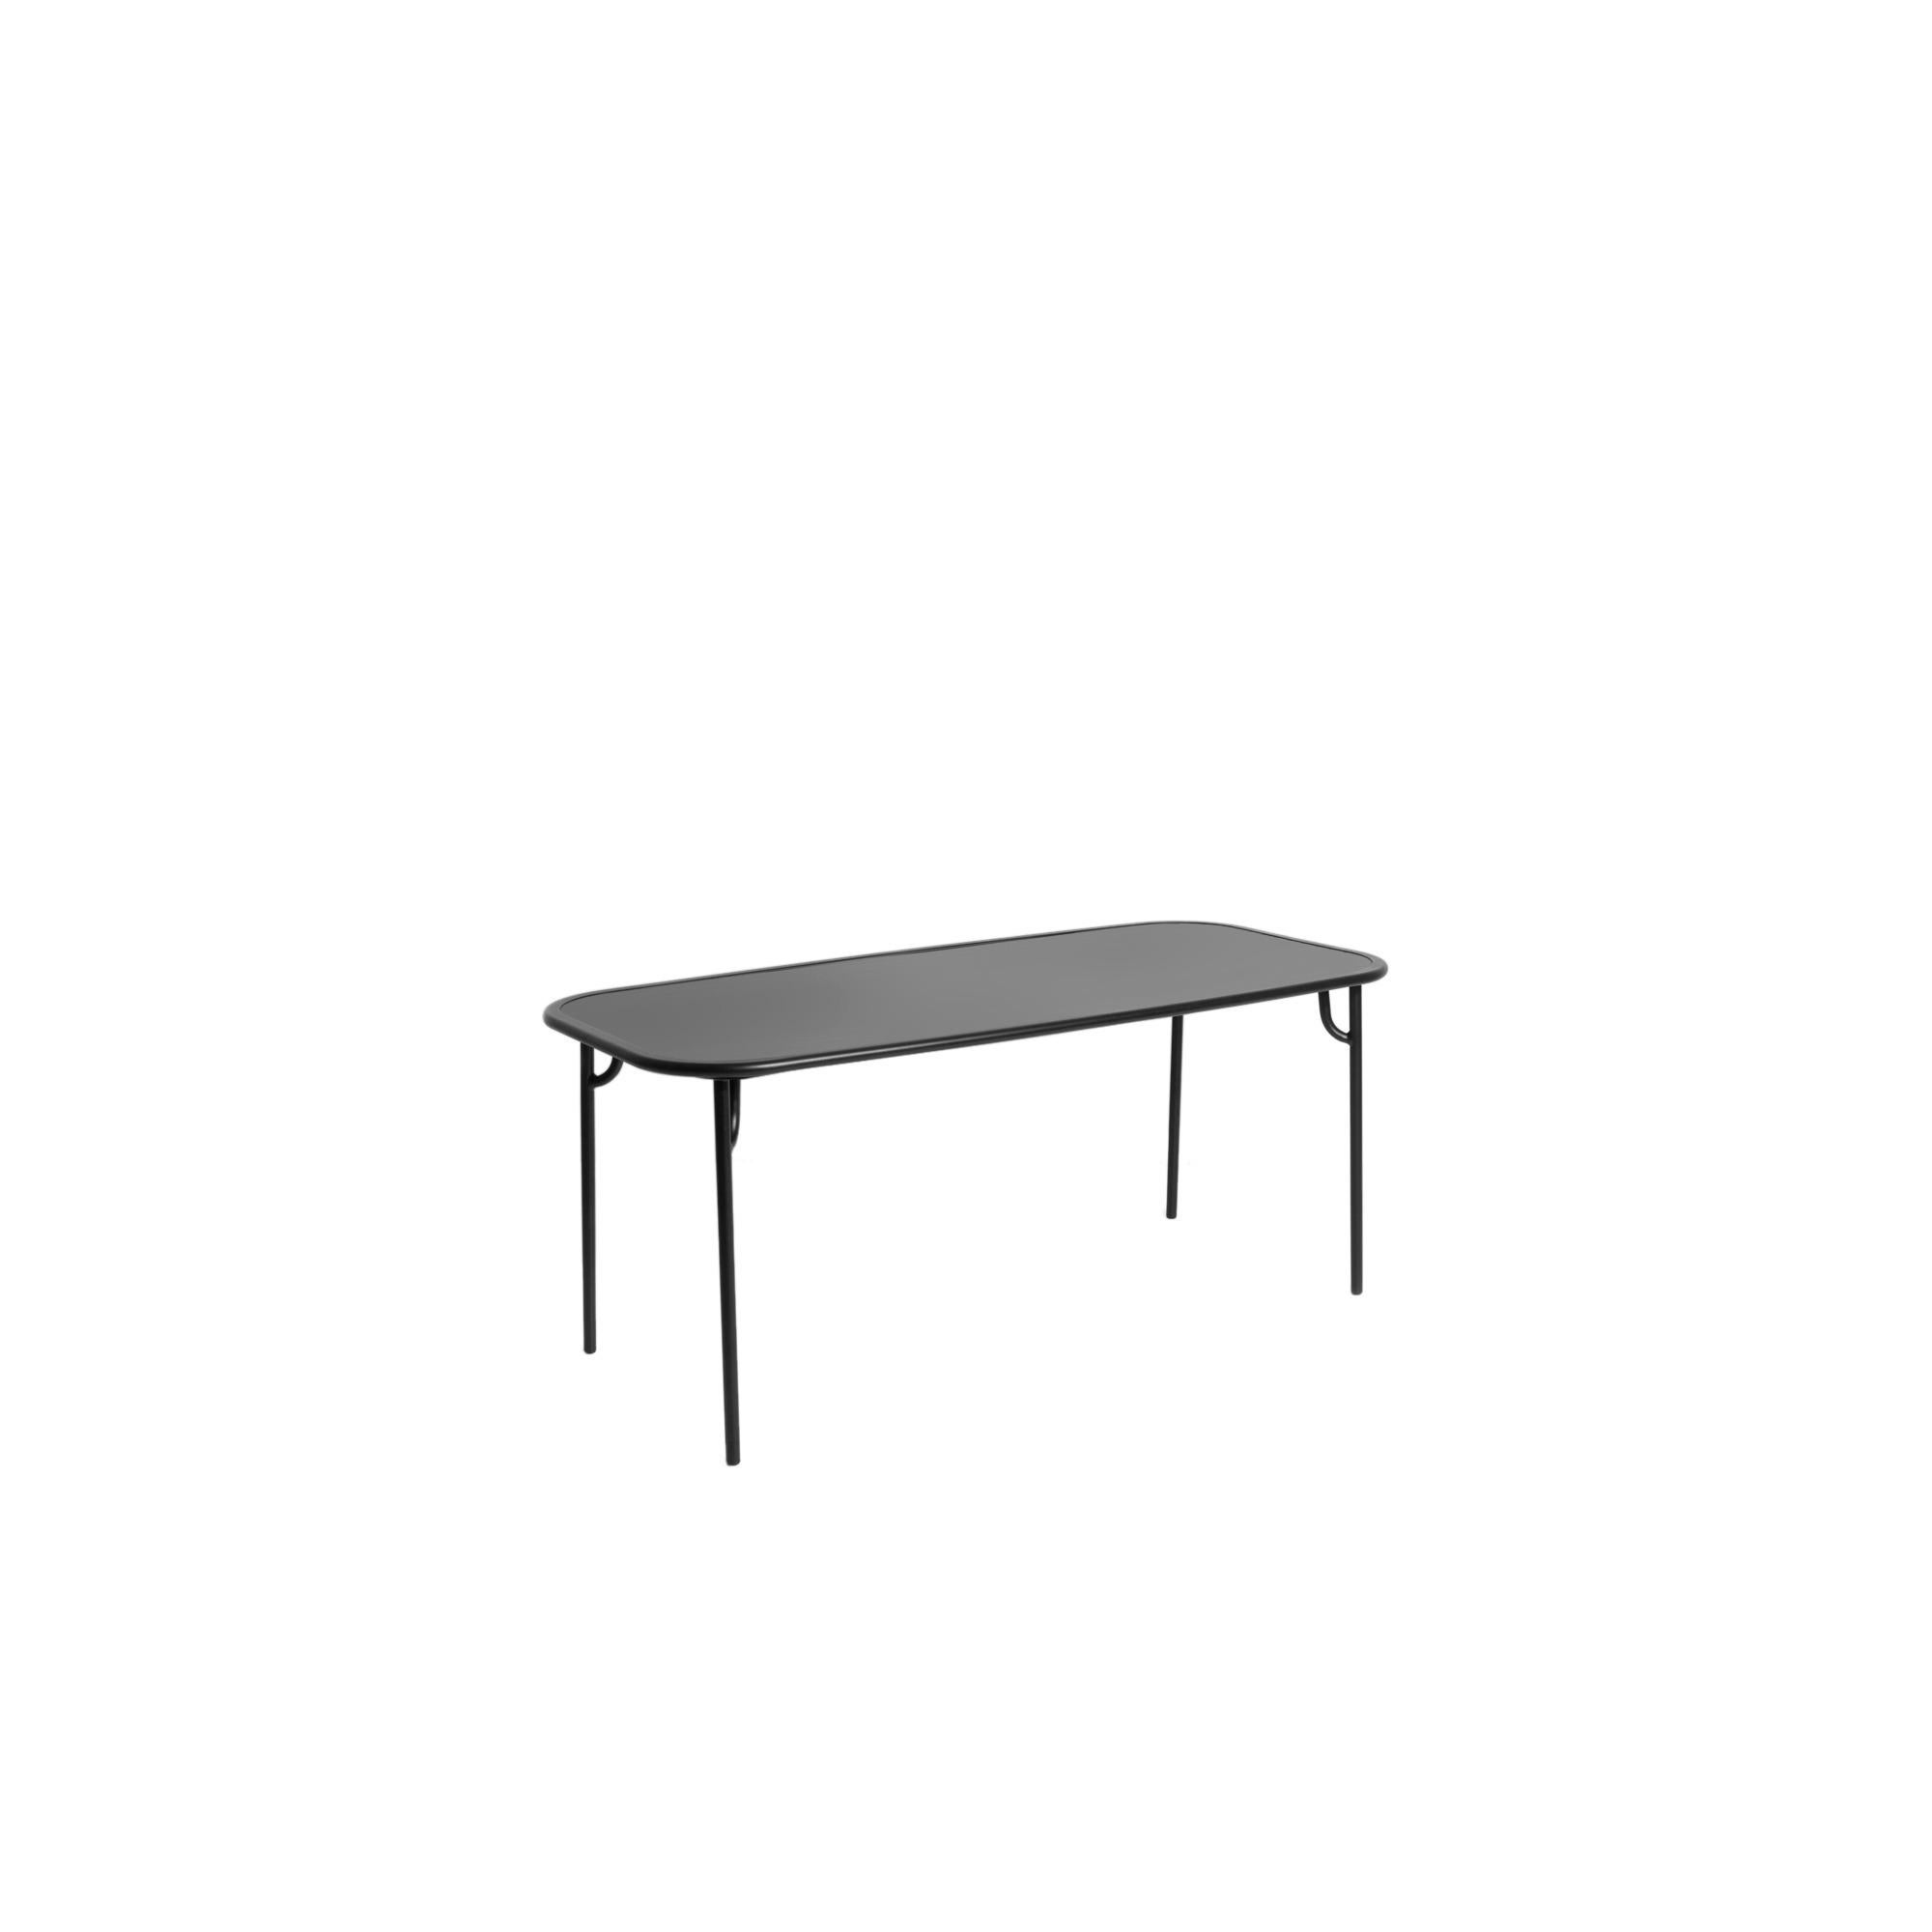 Petite Friture Week-End Medium Plain Rectangular Dining Table in Black Aluminium by Studio BrichetZiegler, 2017

The week-end collection is a full range of outdoor furniture, in aluminium grained epoxy paint, matt finish, that includes 18